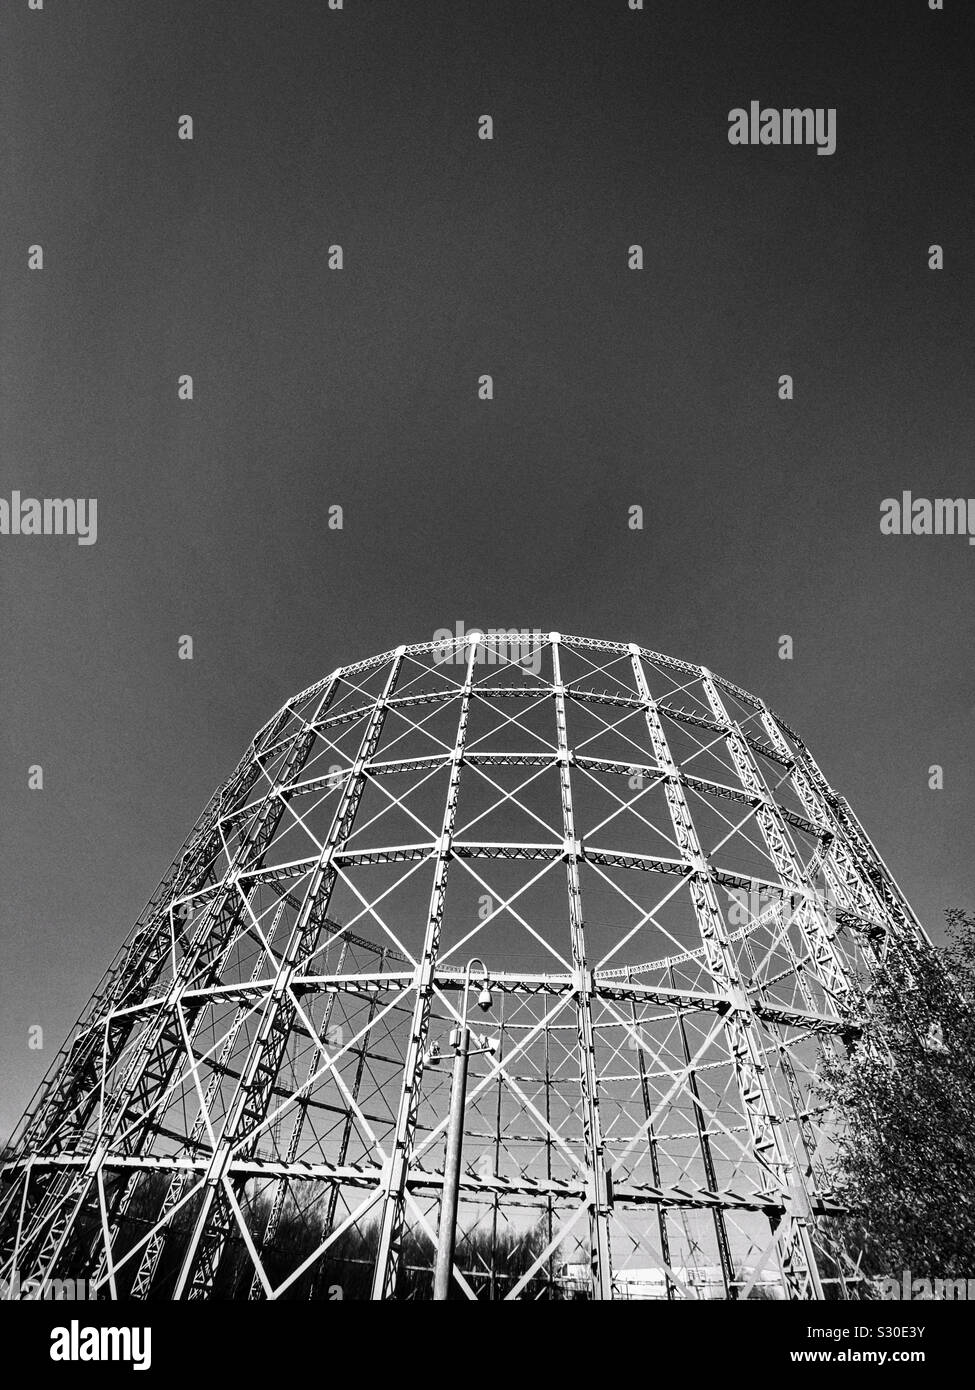 Steel framework of gasometer against a clear sky Stock Photo